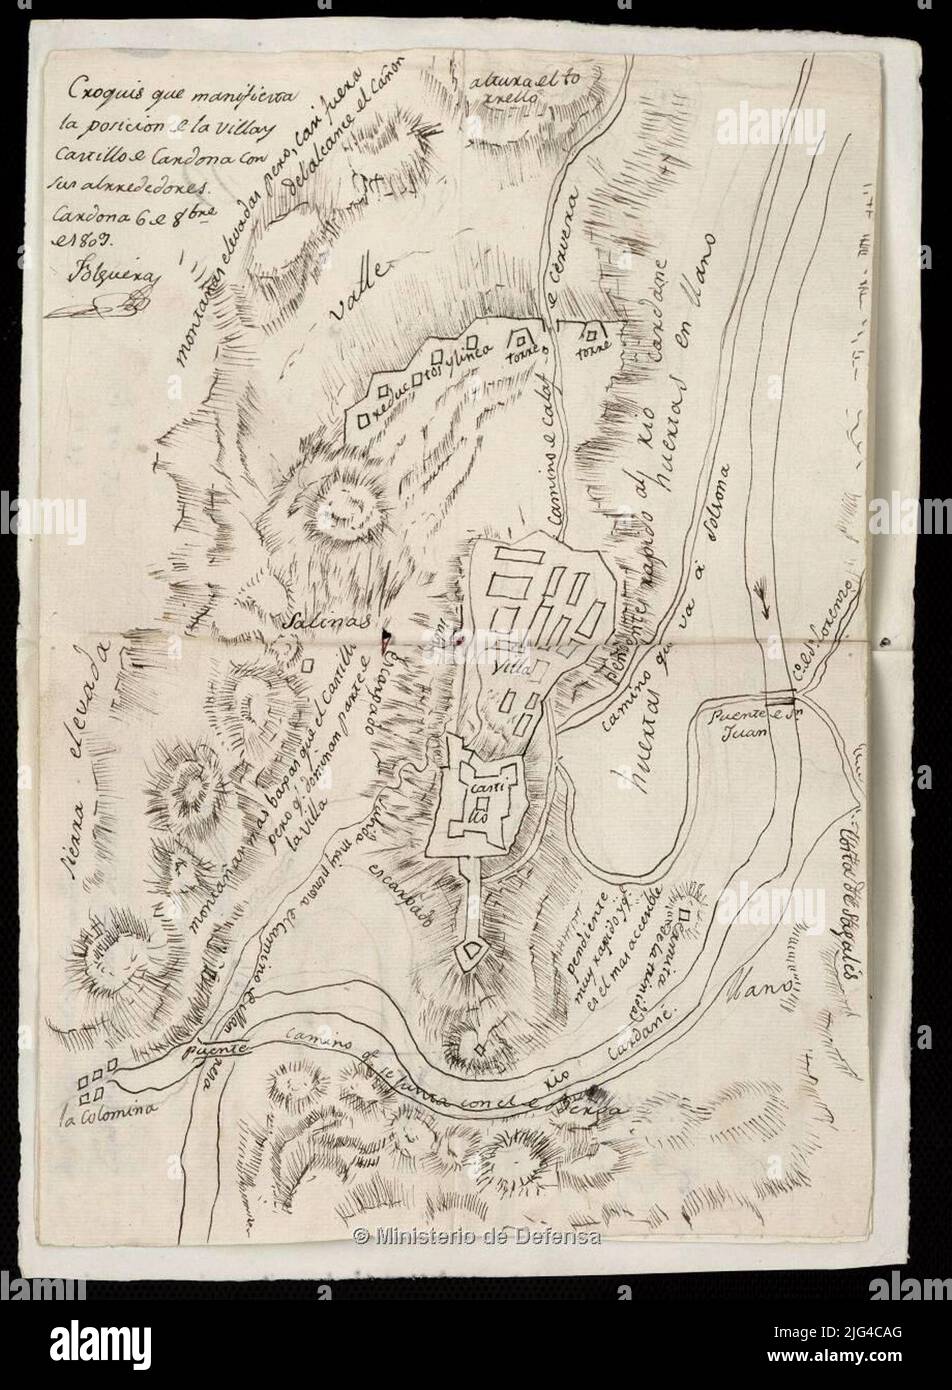 Sketch that manifests the position of the Villa and Castillo de Cardona with its surroundings. Manuscript signed and signed by the authority represented by normal is part of the memory: 'Description of Cardona by D. Ramón Folguera in 1809 Stock Photo